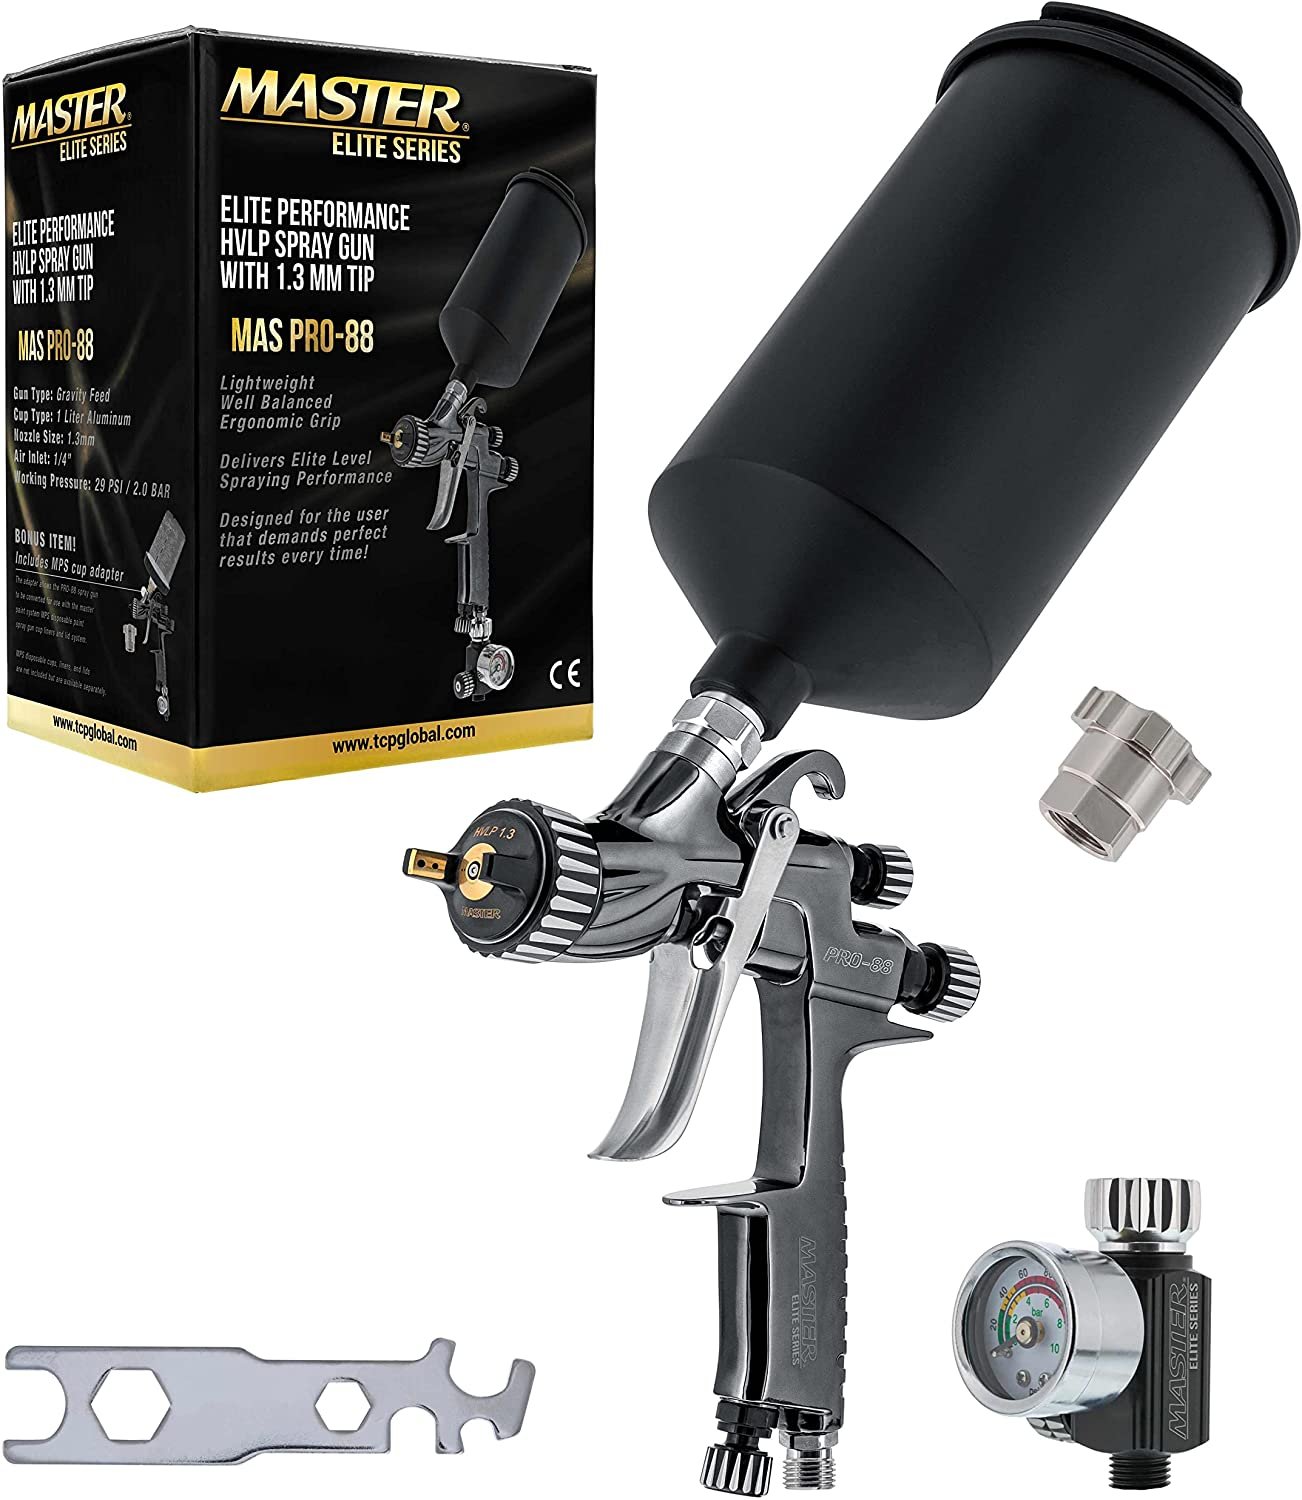 The Master Airbrush Buyer's Guide – Painter's Forum